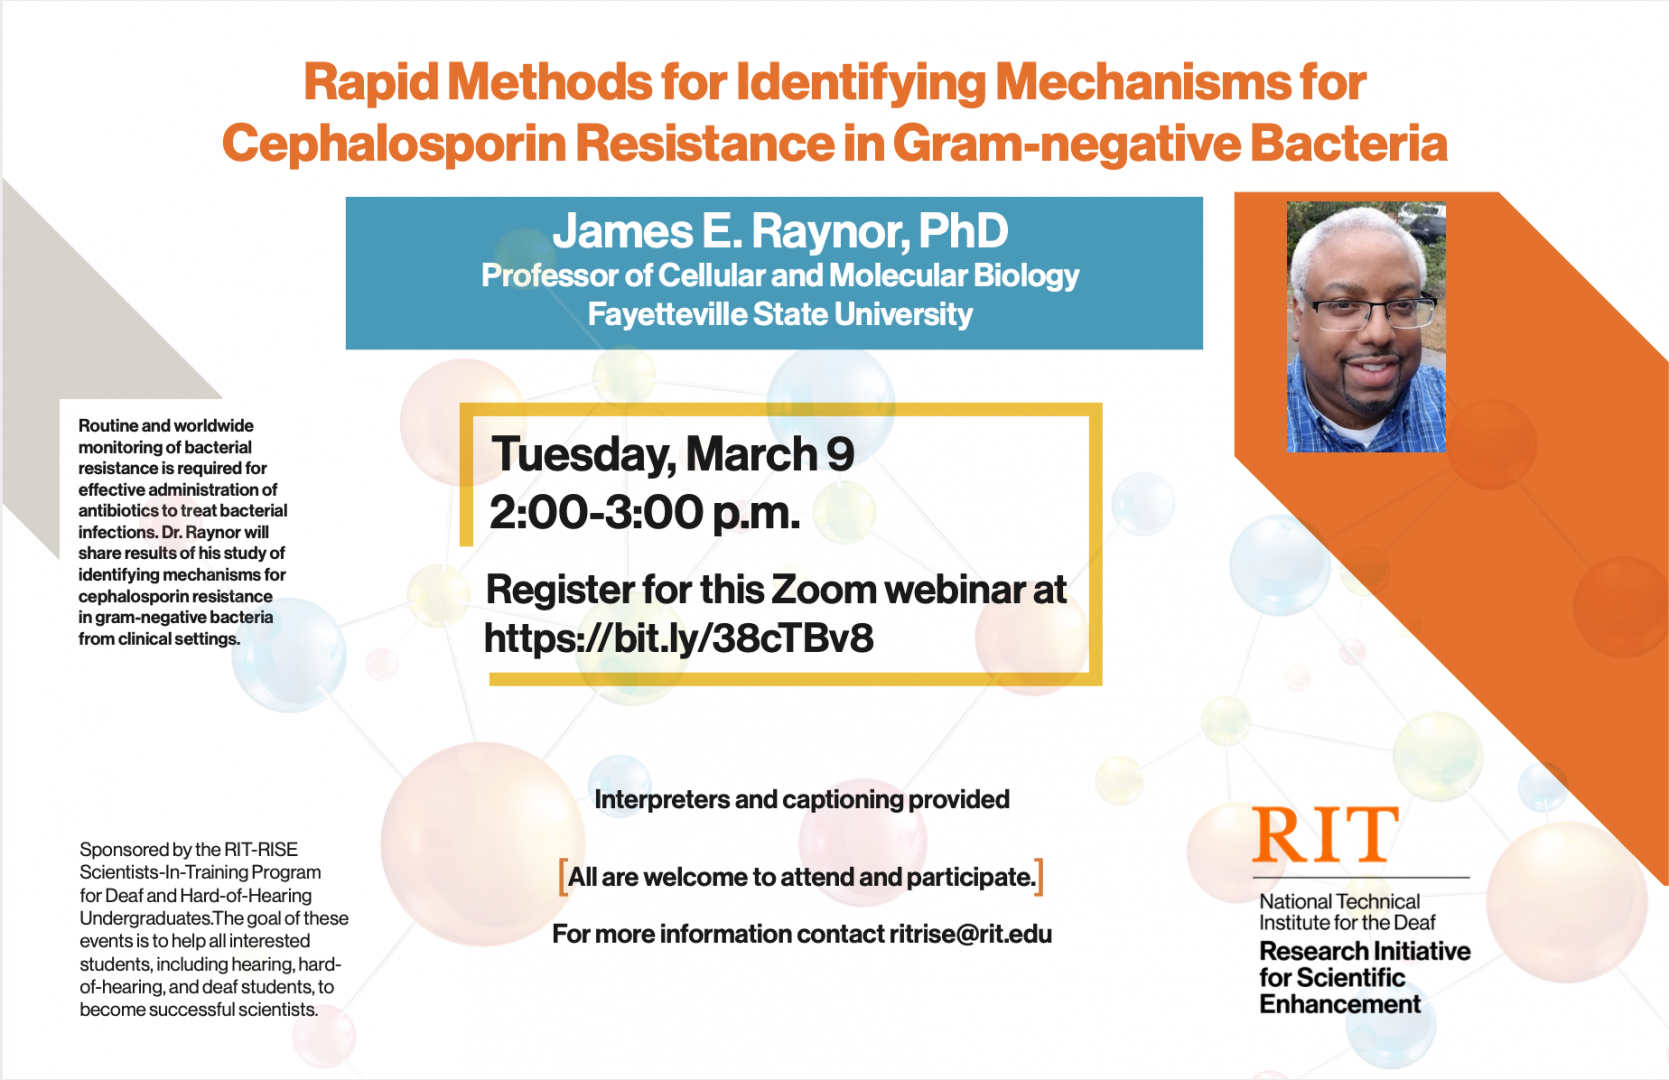 “Rapid Methods for Identifying Mechanisms for Cephalosporin Resistance in Gram-negative Bacteria” presented by Dr. James Raynor. Interpreters and captioning provided. All are welcome to attend and participate! Tuesday, March 9 at 2-3pm. Register for this Zoom webinar at https://rit.zoom.us/webinar/register/WN_qeW3udRJTeyWz_731onO6Q  For more information contact ritrise@rit.edu